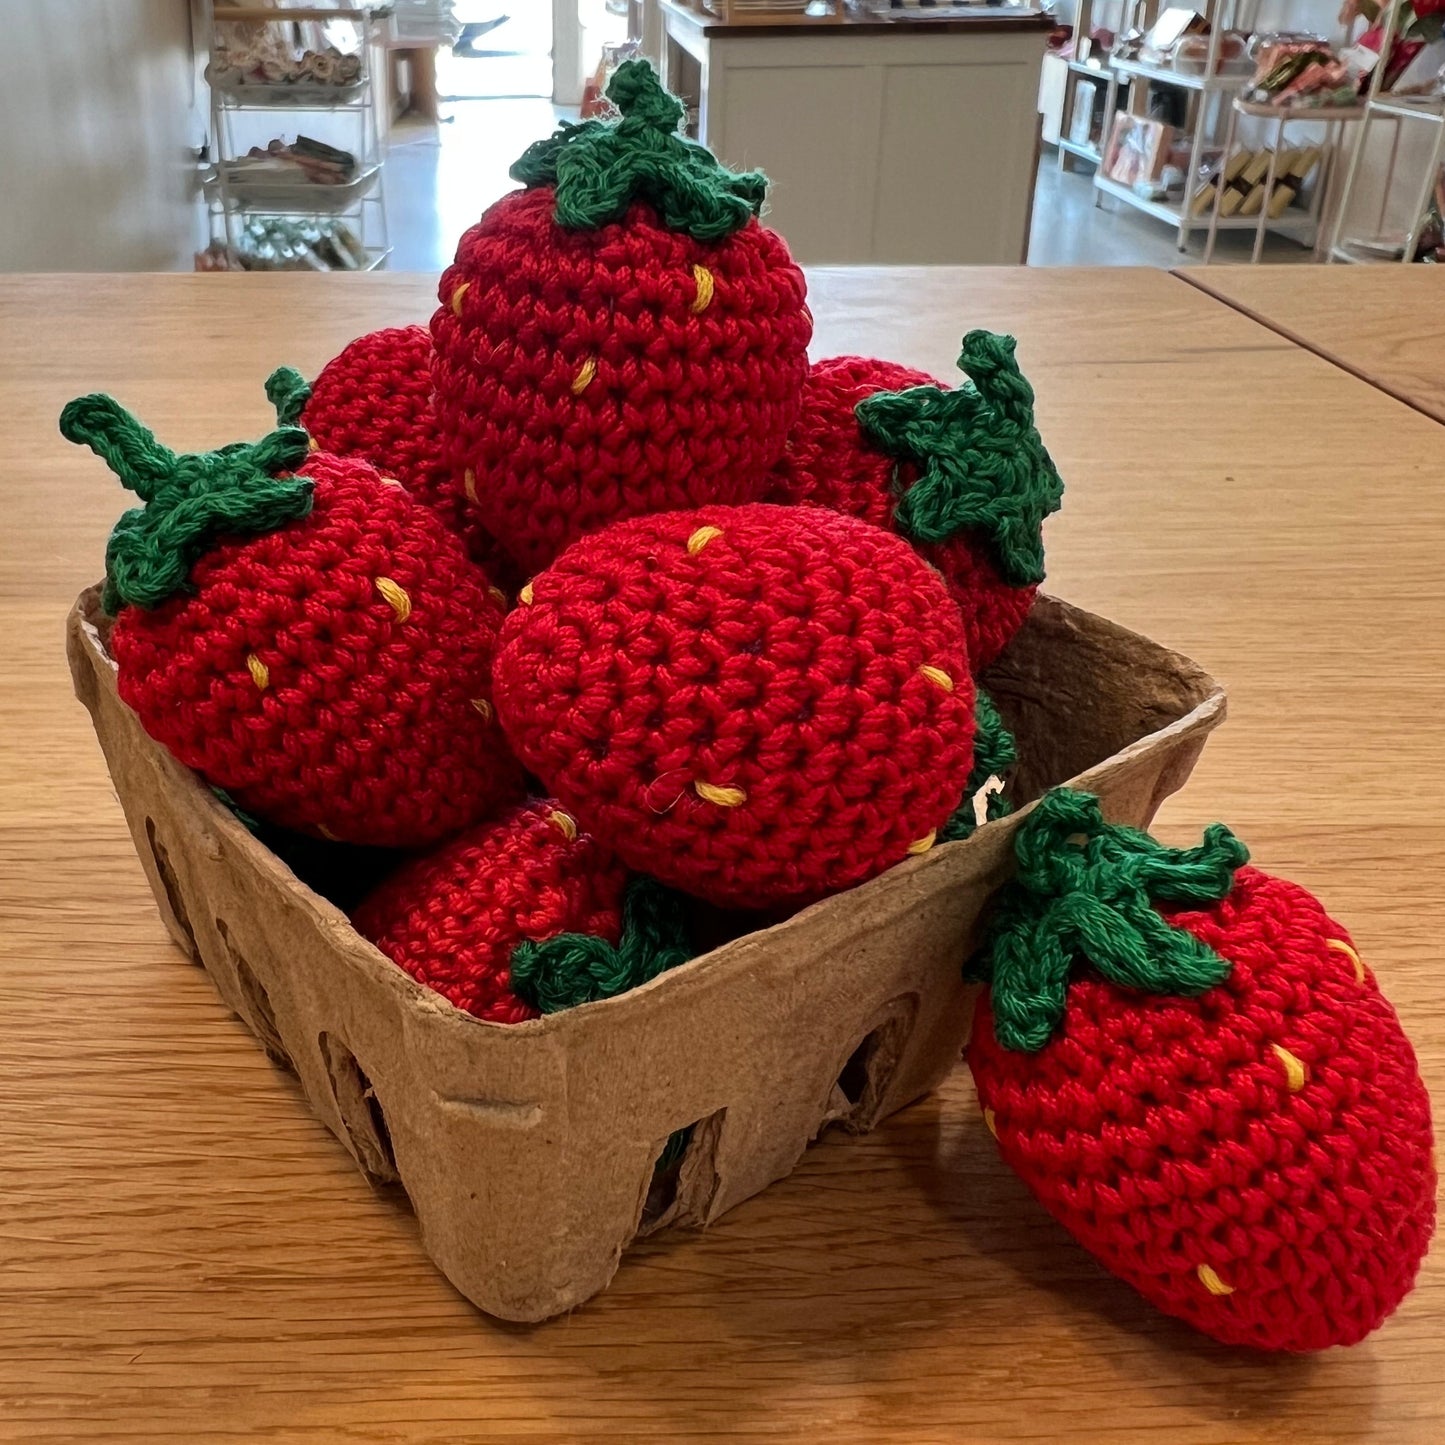 crocheted strawberries in a berry basket 